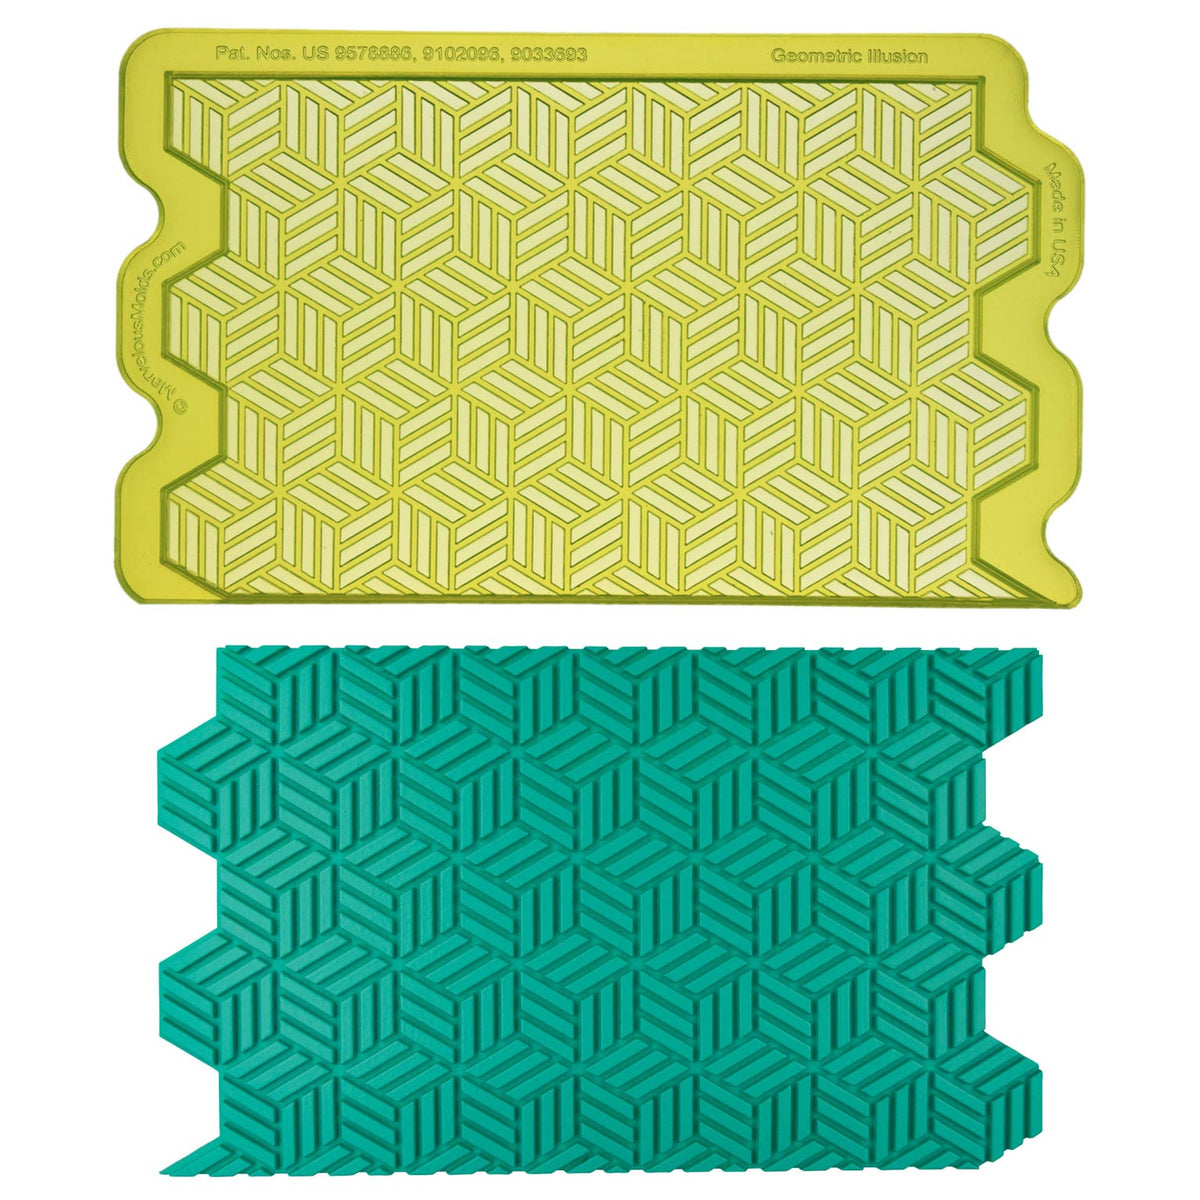 Geometric Illusion Food Safe Silicone Simpress Mold for Fondant Cake Decorating by Marvelous Molds